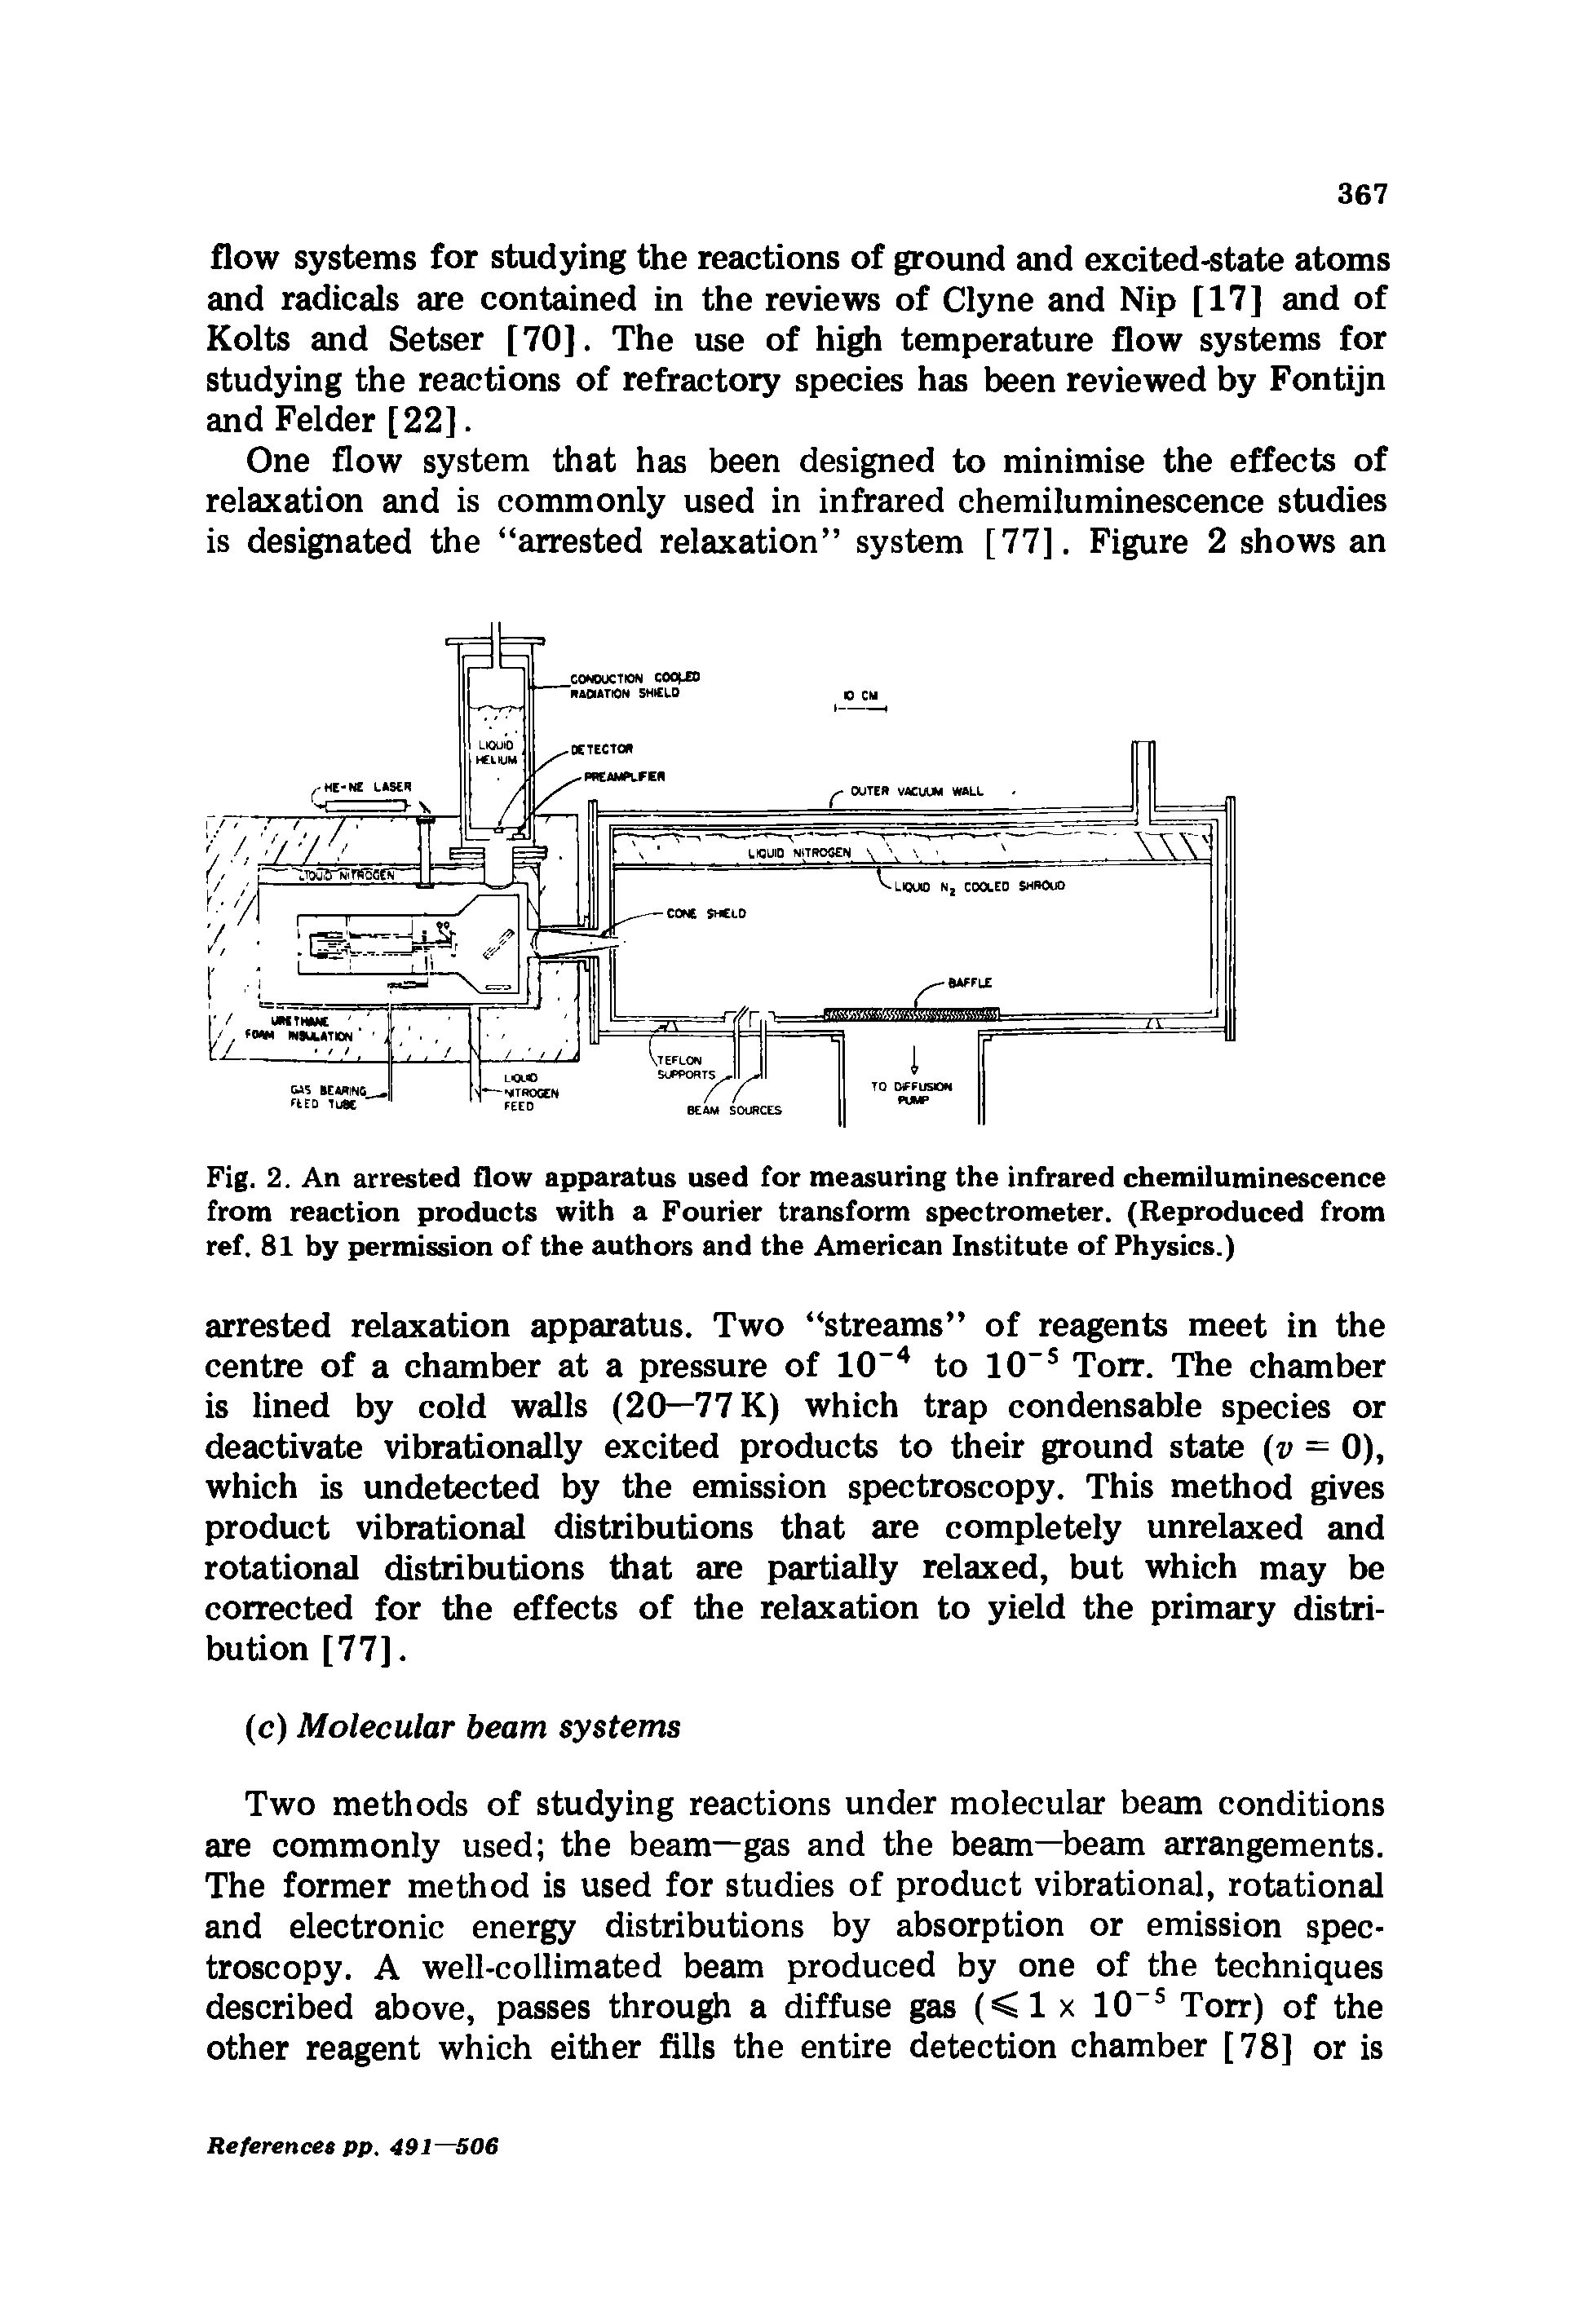 Fig. 2. An arrested flow apparatus used for measuring the infrared chemiluminescence from reaction products with a Fourier transform spectrometer. (Reproduced from ref. 81 by permission of the authors and the American Institute of Physics.)...